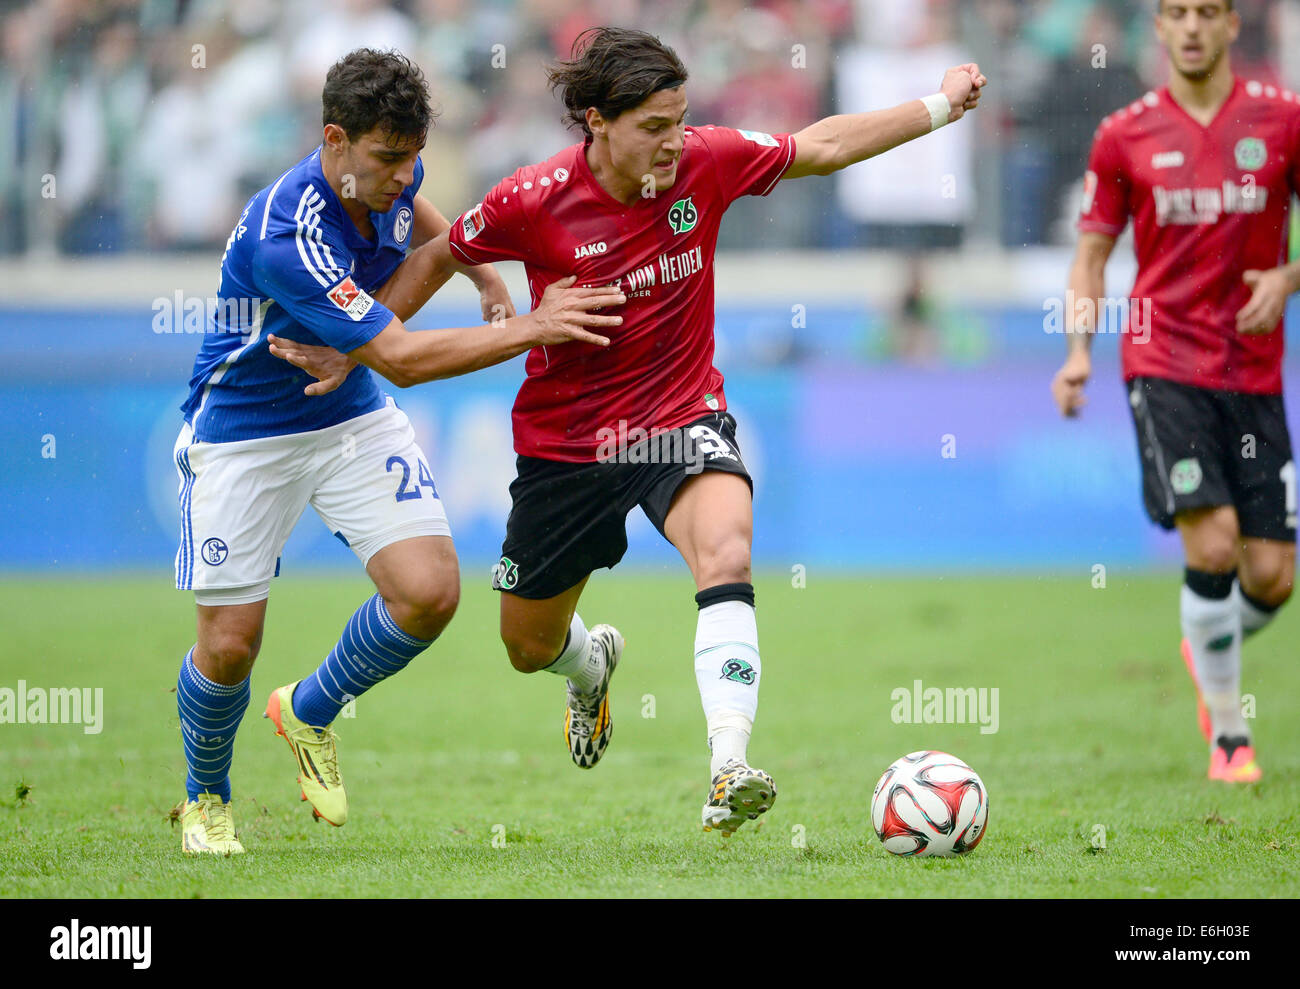 Hanover's Miiko Albornoz (R) and Schalke's Kaan Ayhan in action during the German Bundesliga match between Hannover 96 and FC Schalke 04 at HDI Arena in Hanover, Germany, 23 August 2014. Photo: PETER STEFFEN/dpa (ATTENTION: Due to the accreditation guidelines, the DFL only permits the publication and utilisation of up to 15 pictures per match on the internet and in online media during the match.) Stock Photo